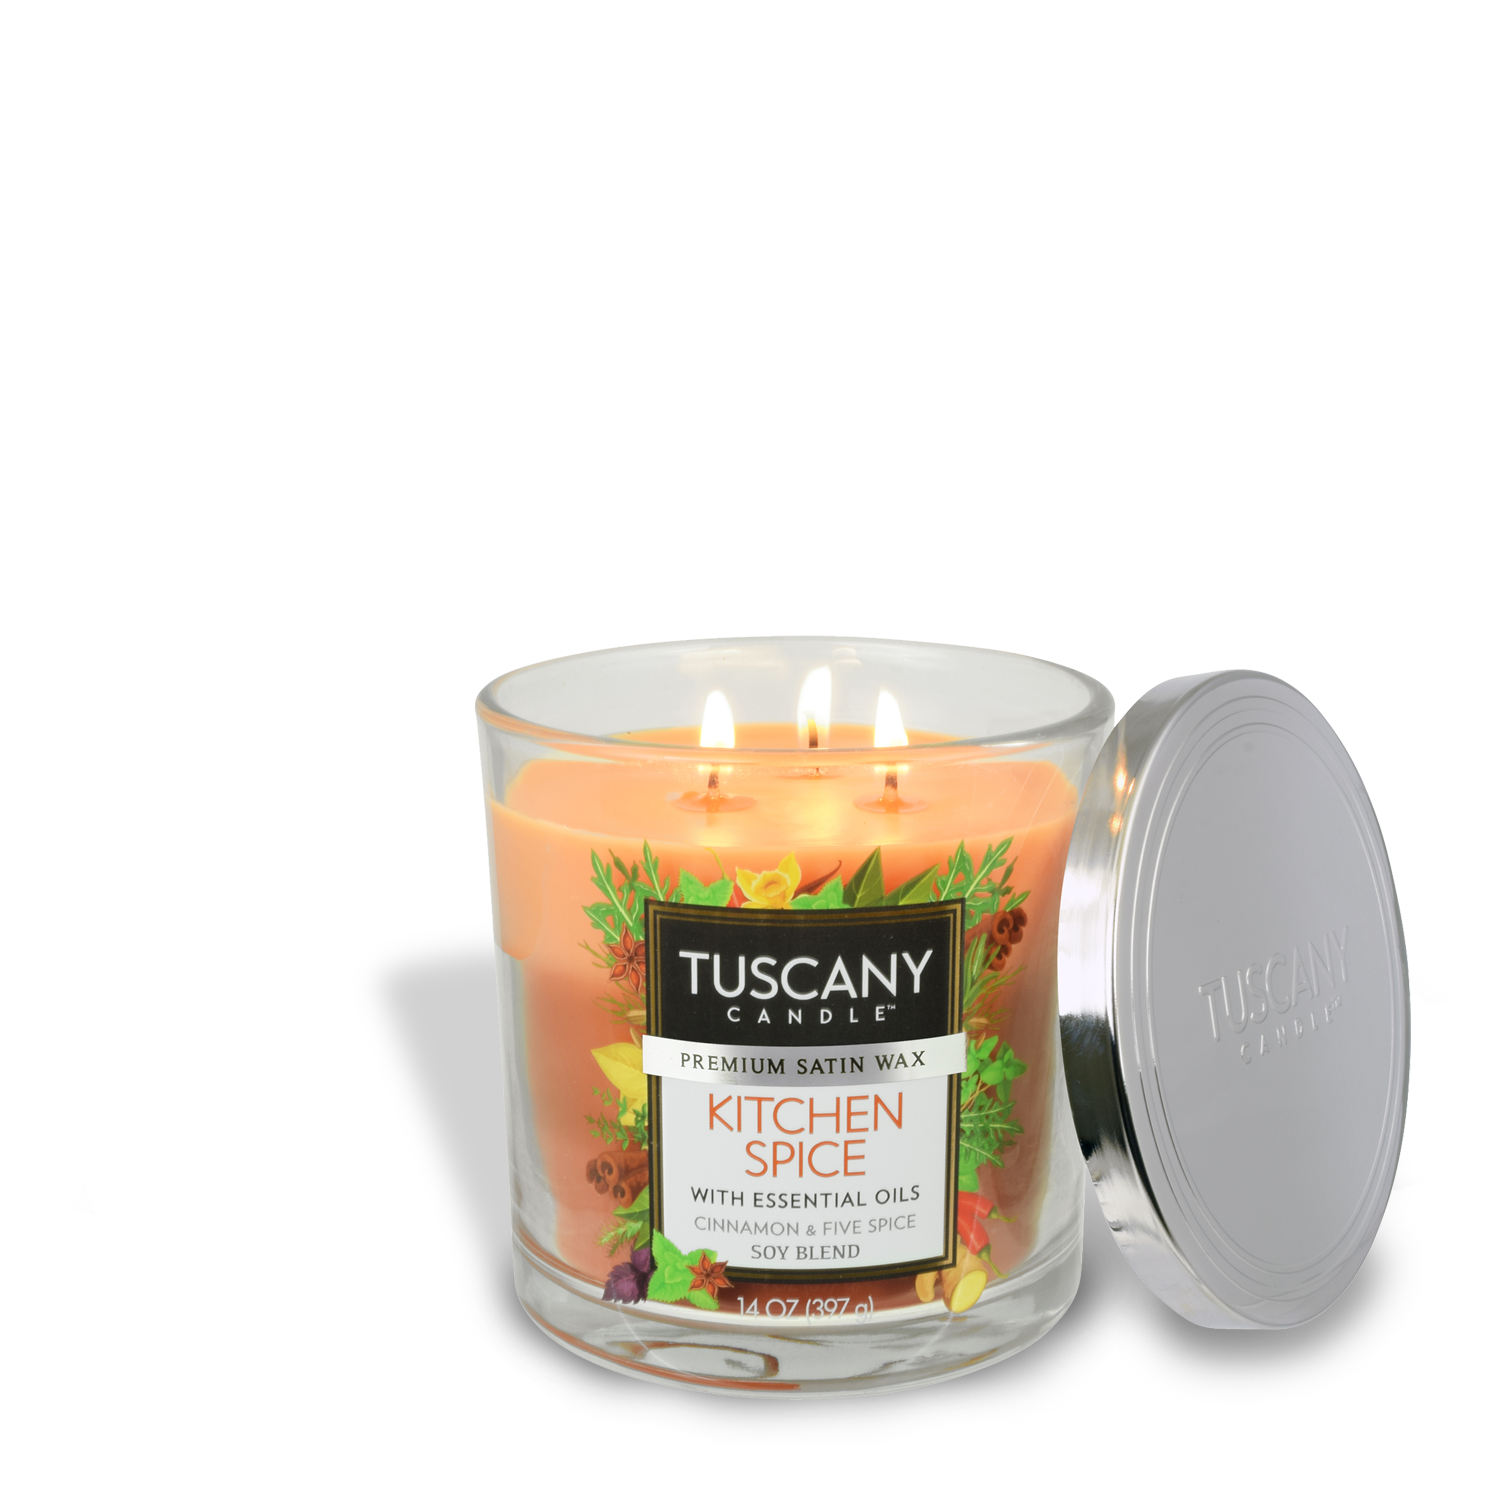 Experience an aromatic adventure with our Tuscany Candle scented candle, the Kitchen Spice Long-Lasting Scented Jar Candle (14 oz), infused with the warm and inviting fragrance of kitchen spices.